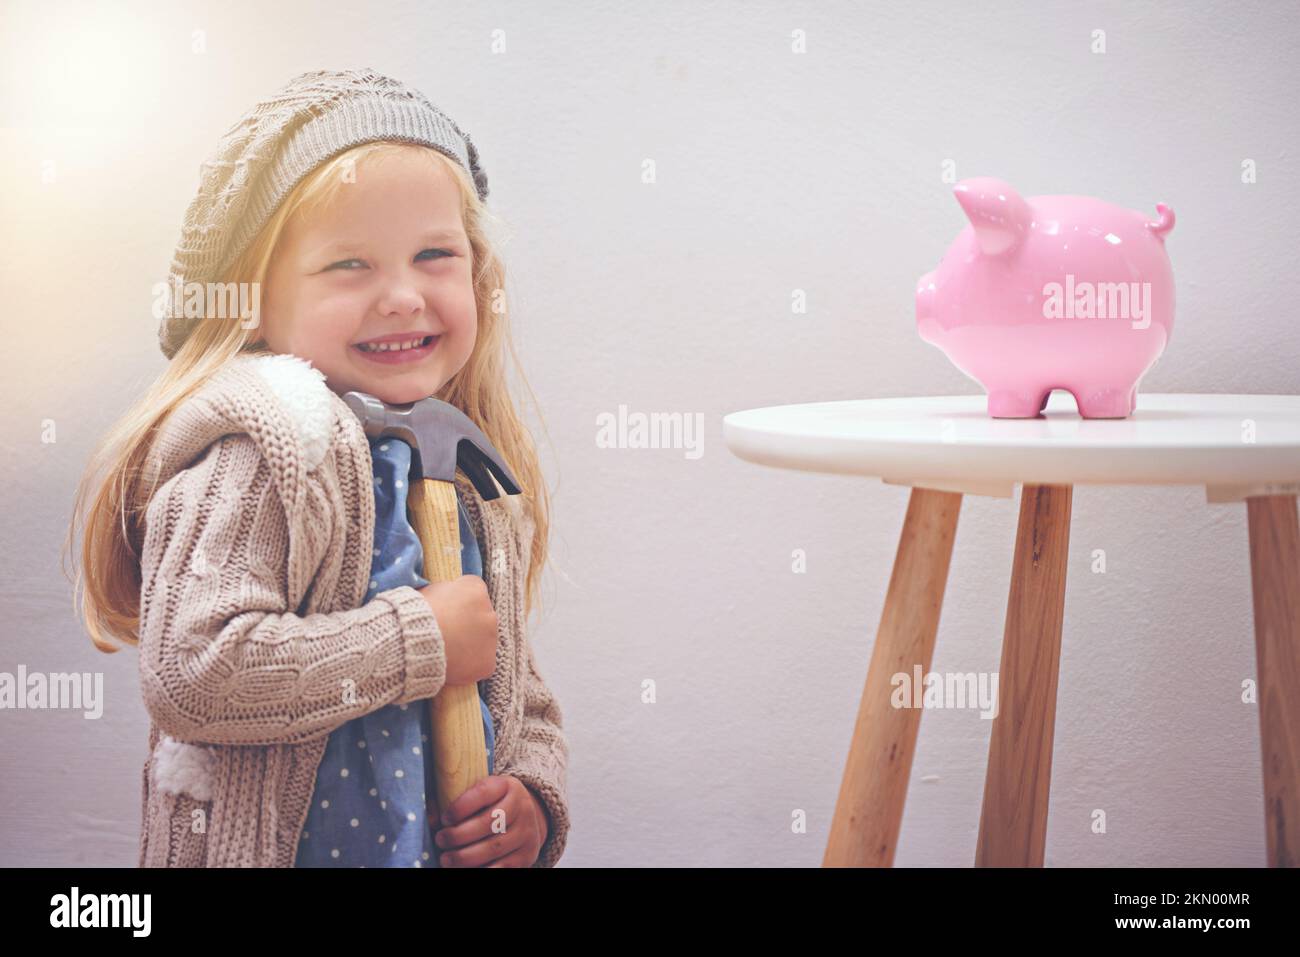 Im about to be a millionaire. A little girl standing next to her piggy bank with a hammer. Stock Photo